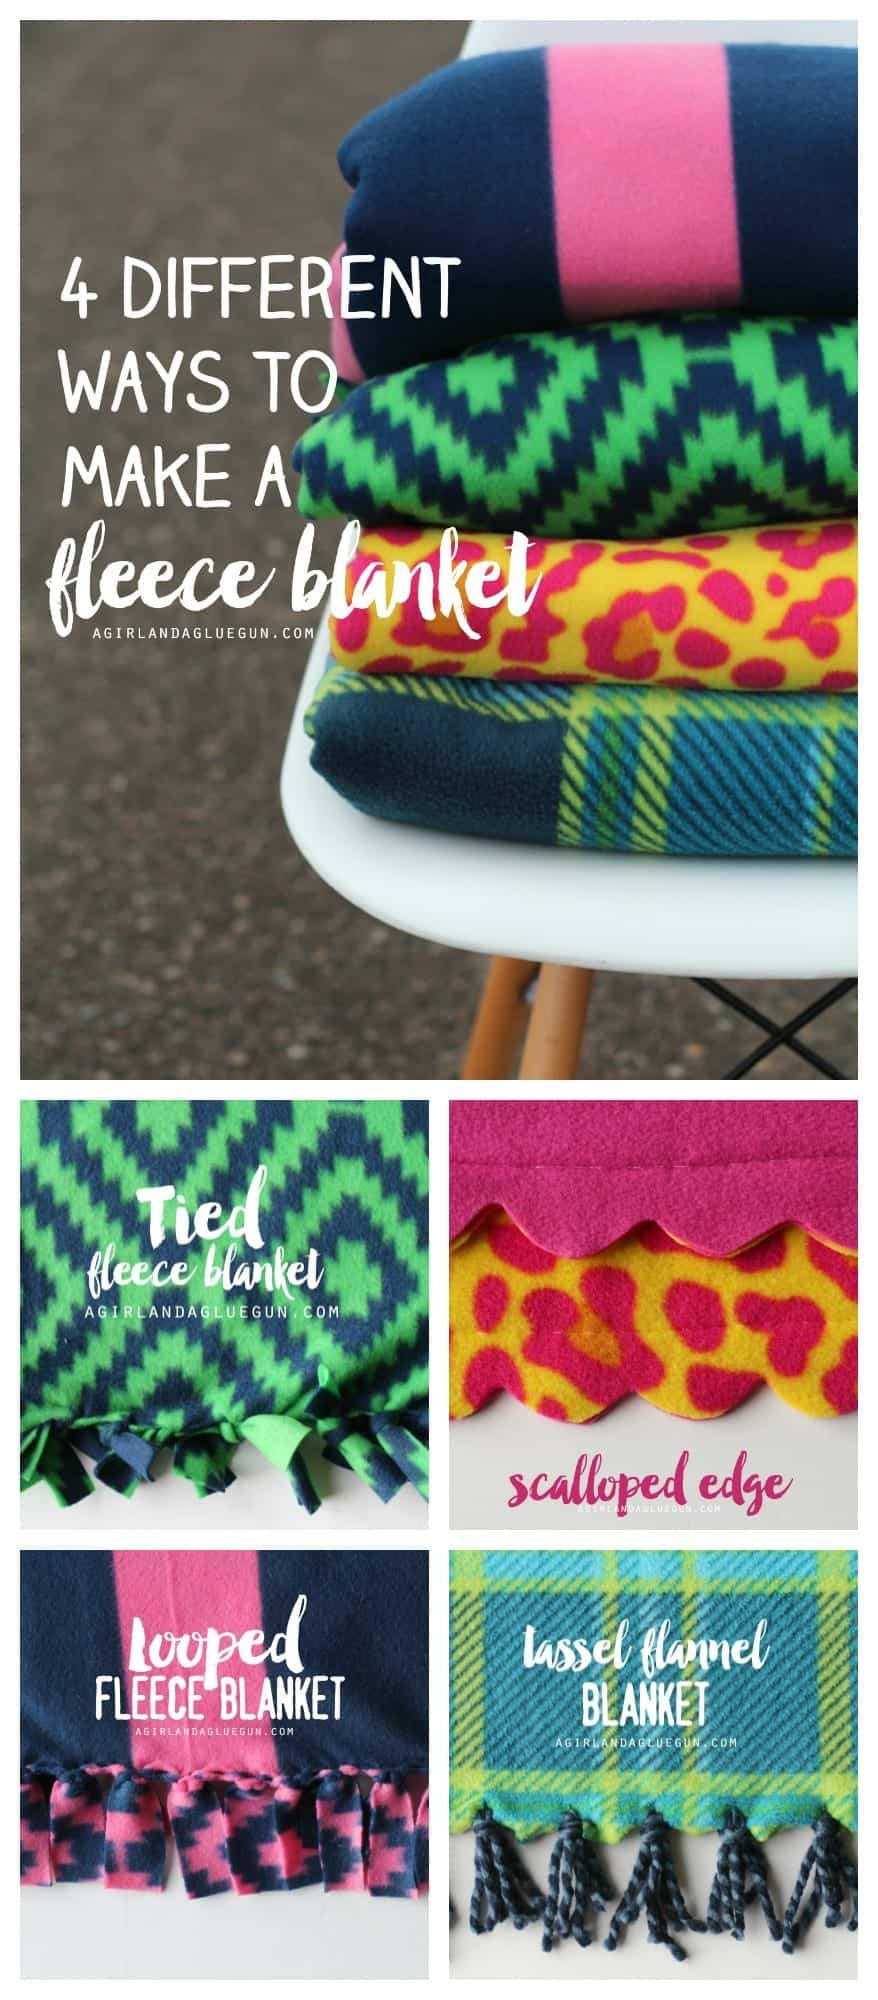 Fleece is such a great fabric to work with. Here are 30 fleece sewing projects to make (and a few no-sew projects too!) Pillows, blankets, scarves and more!